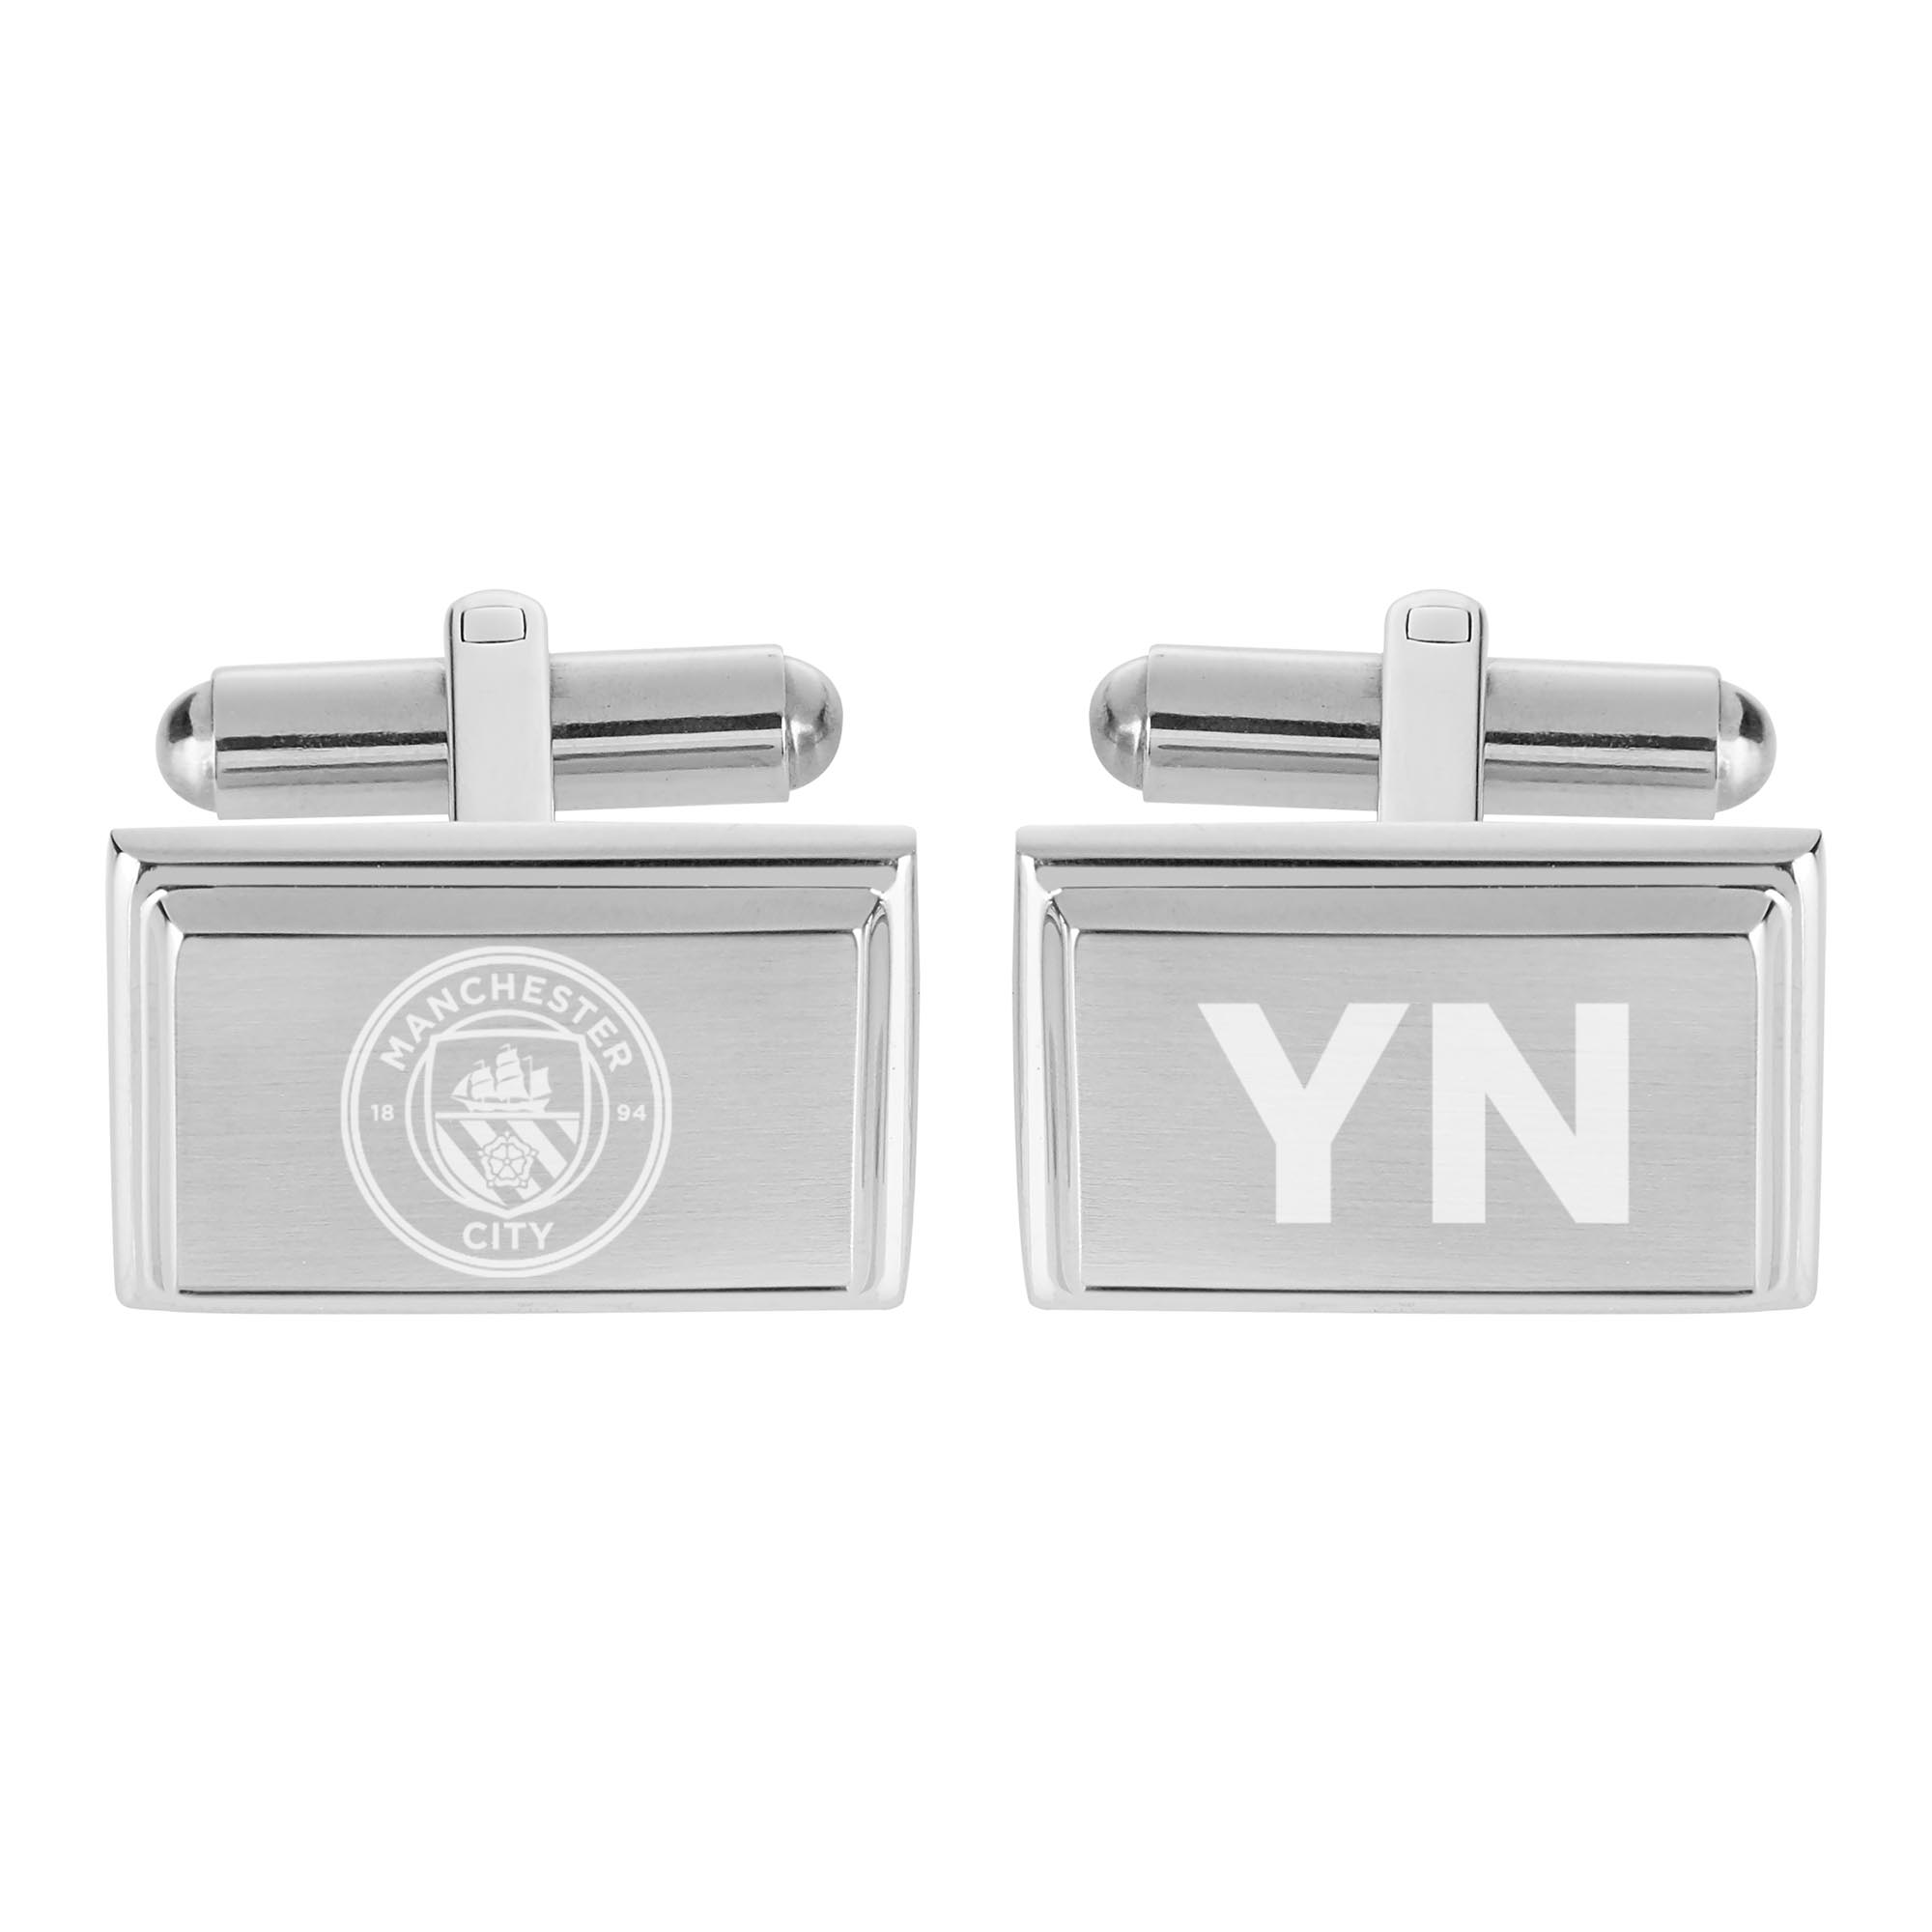 Personalised Manchester City FC Crest Cufflinks